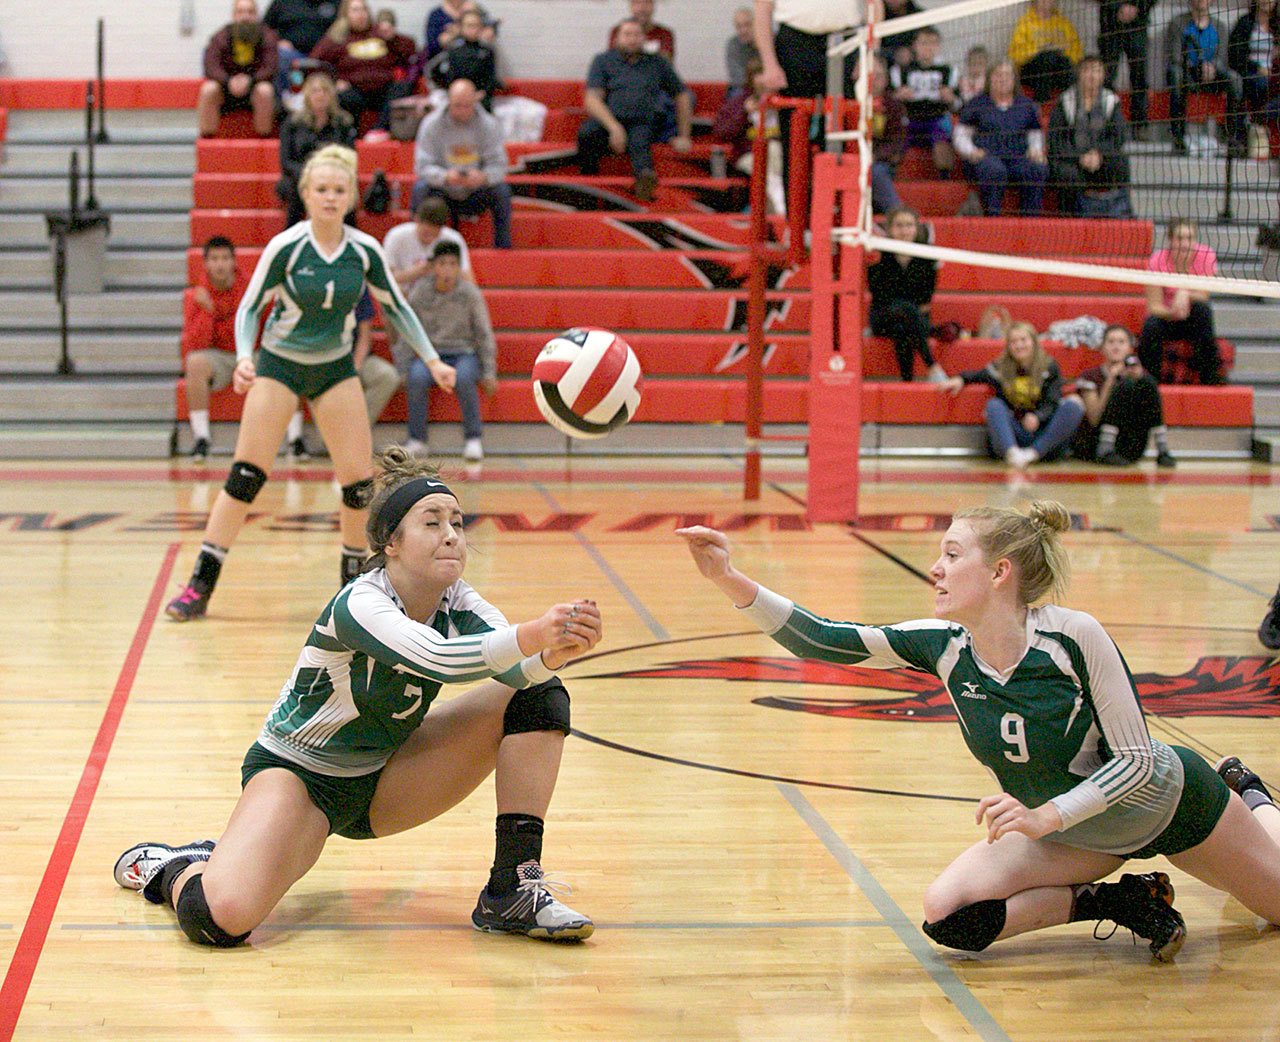 Steve Mullensky/for Peninsula Daily News Port Angeles’ Kiana Robideau (2) returns a serve and Alyssa Sweet is ready to assist during the Roughriders Olympic League 2A Division tiebreaker against Kingston.